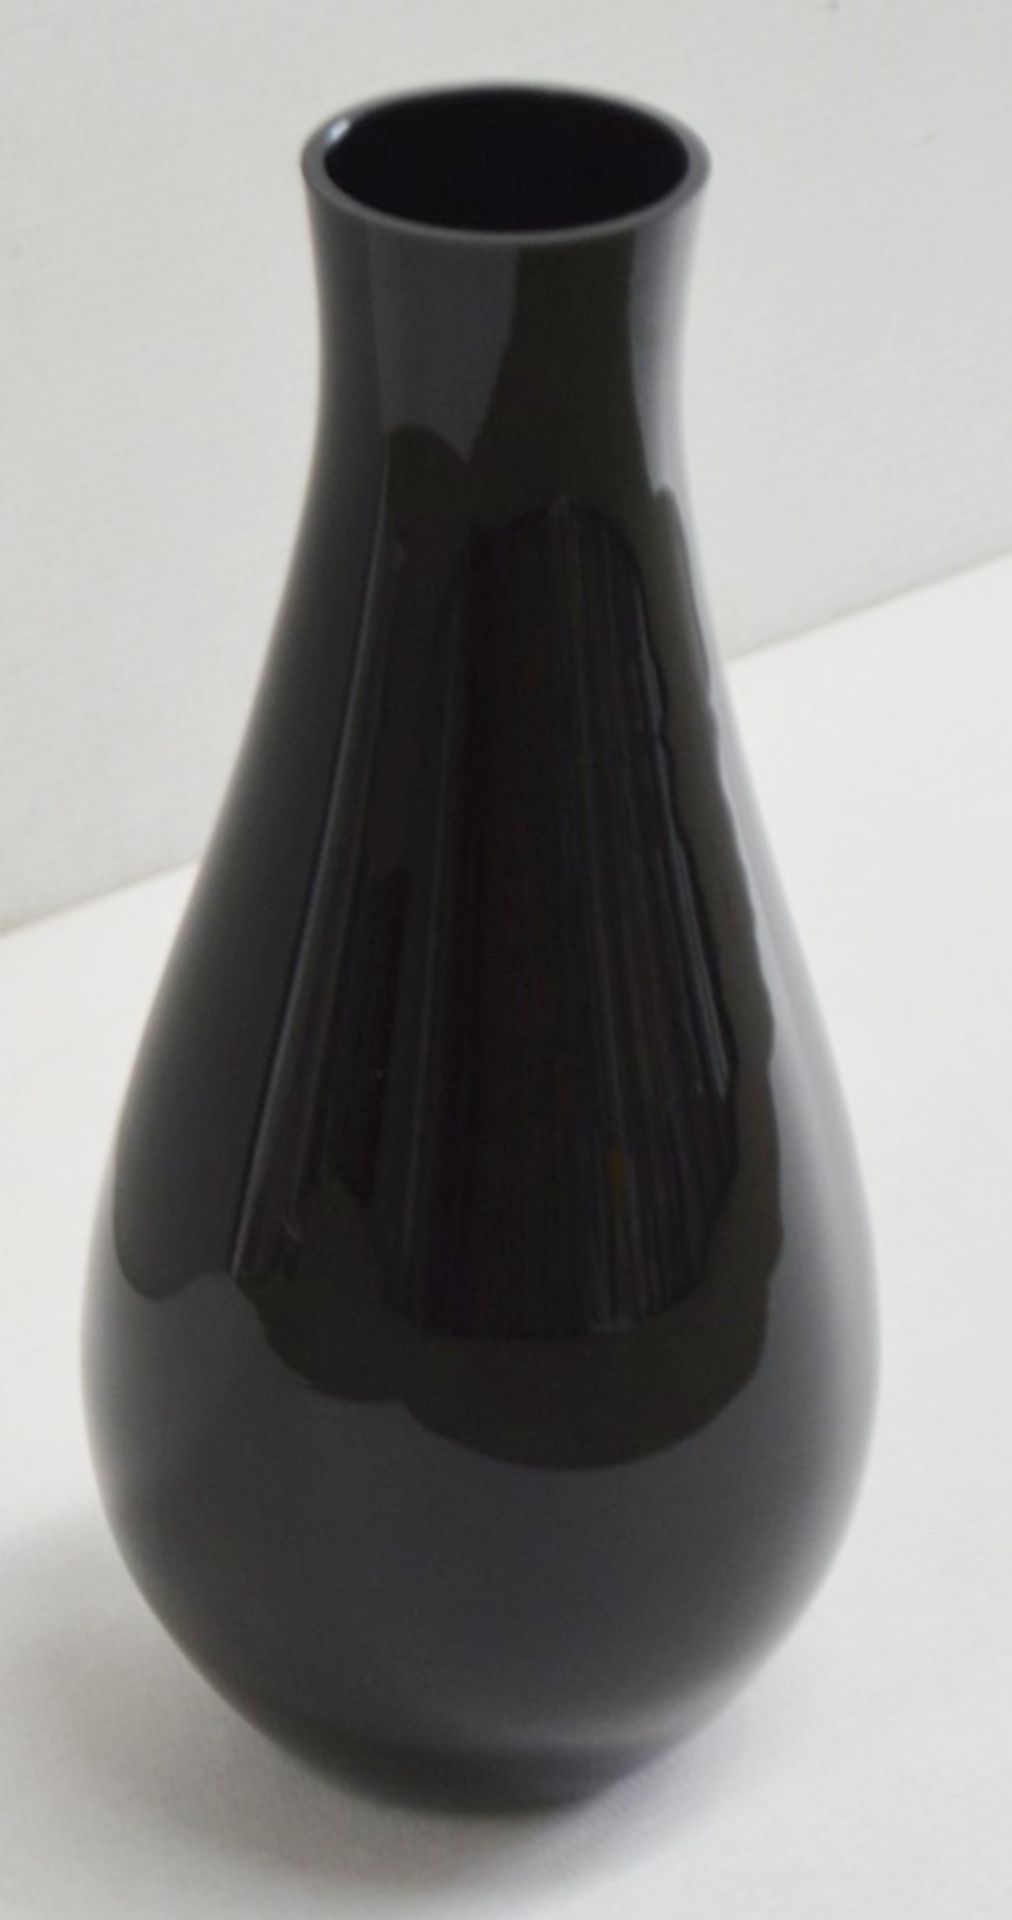 1 x Large Flower Vase In Black Glass - Preowned, From An Exclusive Property - Dimensions: H56 x - Image 2 of 5